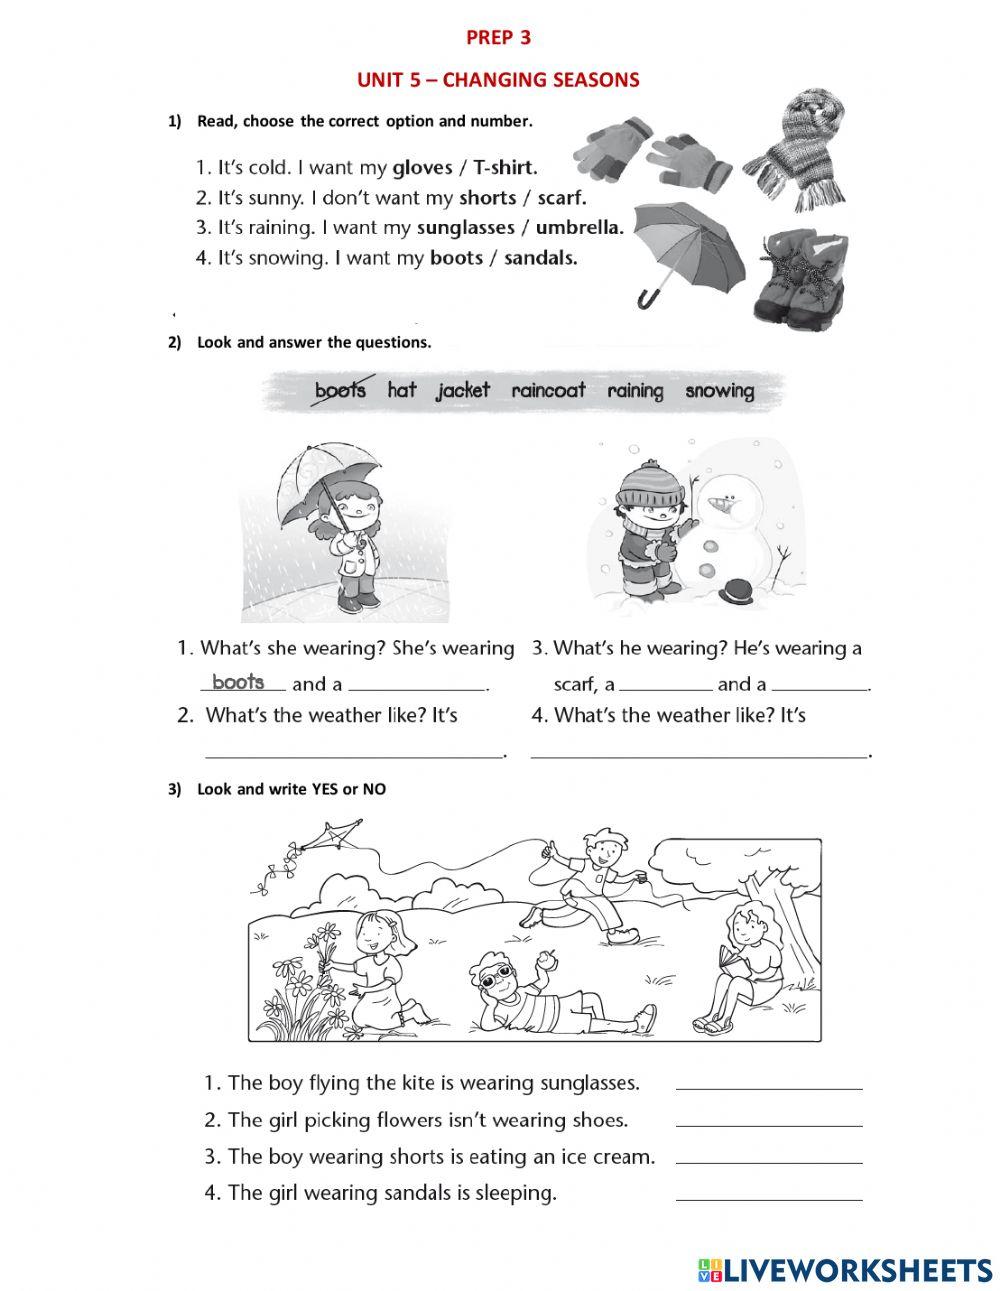 PREP 3 - Unit 5 Lessons 1 and 2